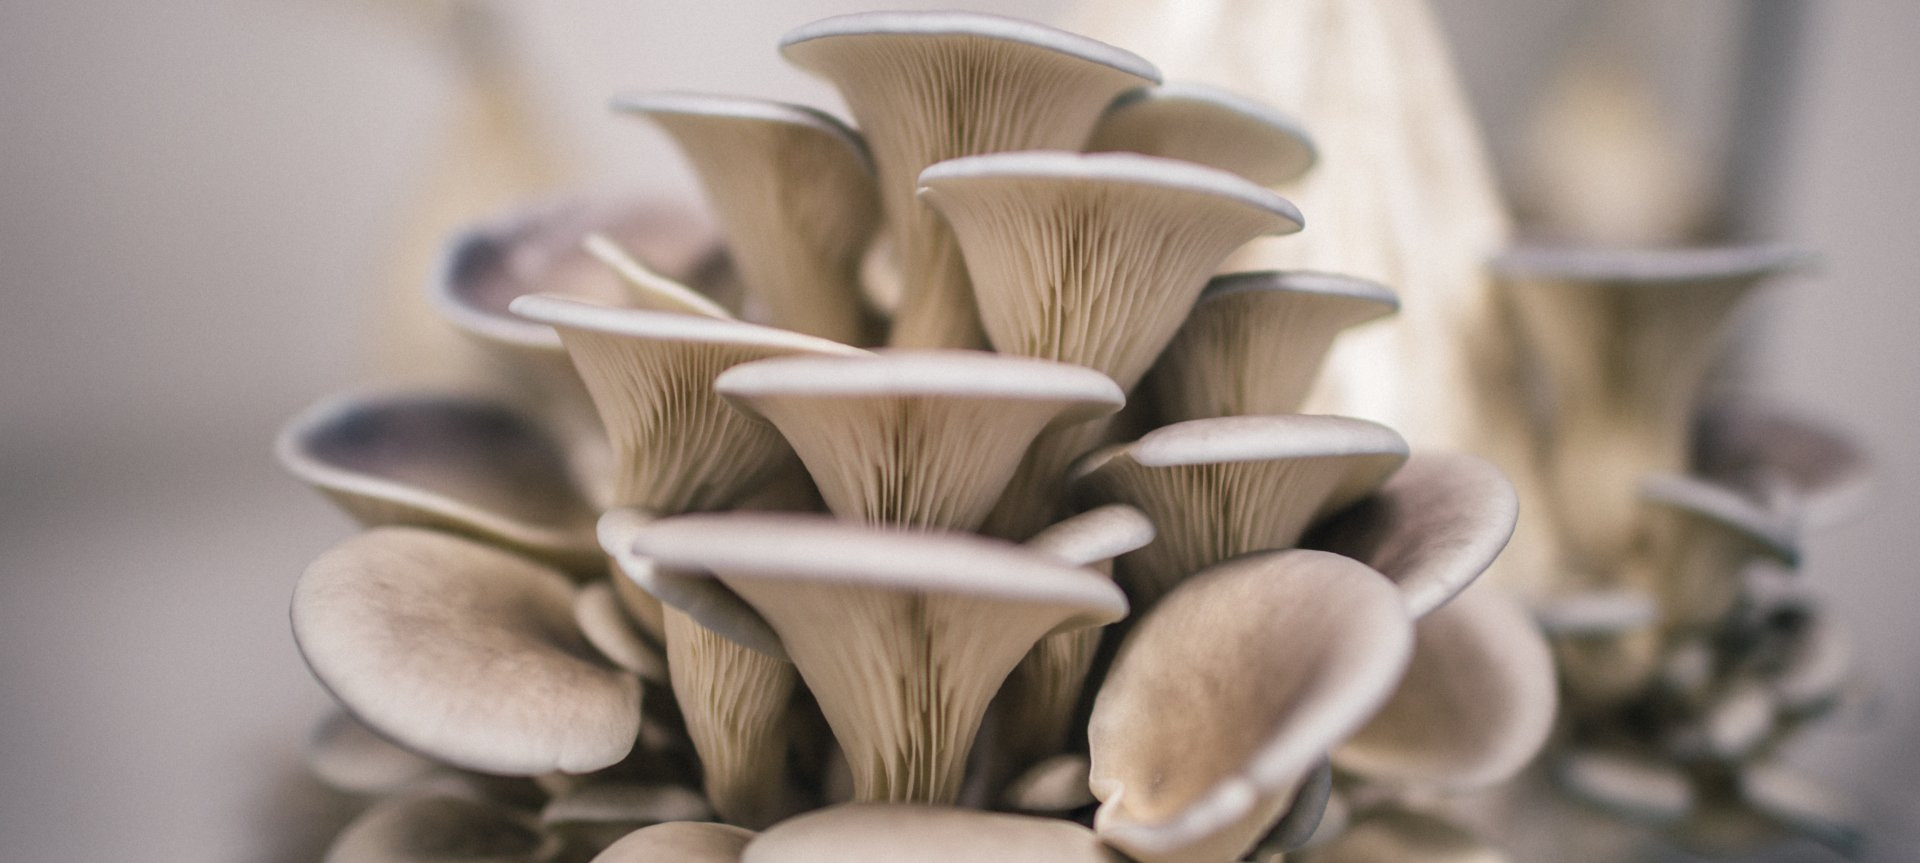 Grow Oyster Mushrooms
 How To Grow Oyster Mushrooms The Ultimate Step By Step